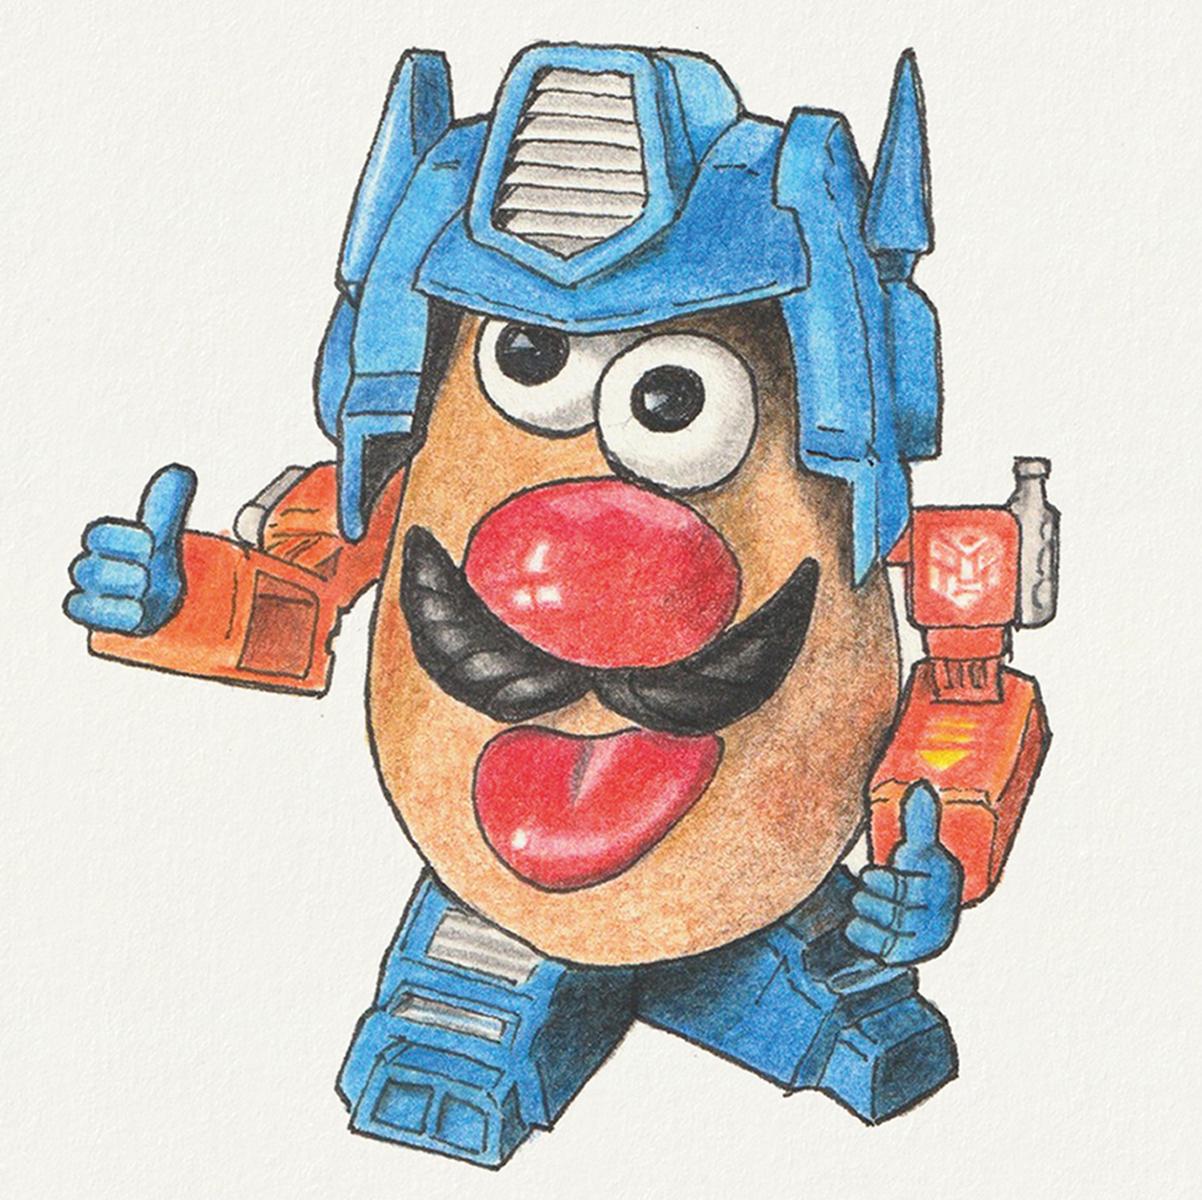 Limited edition print from a pen, ink and coloured pencil drawing of the Mr Potatohead toy dressed as Optimus Prime